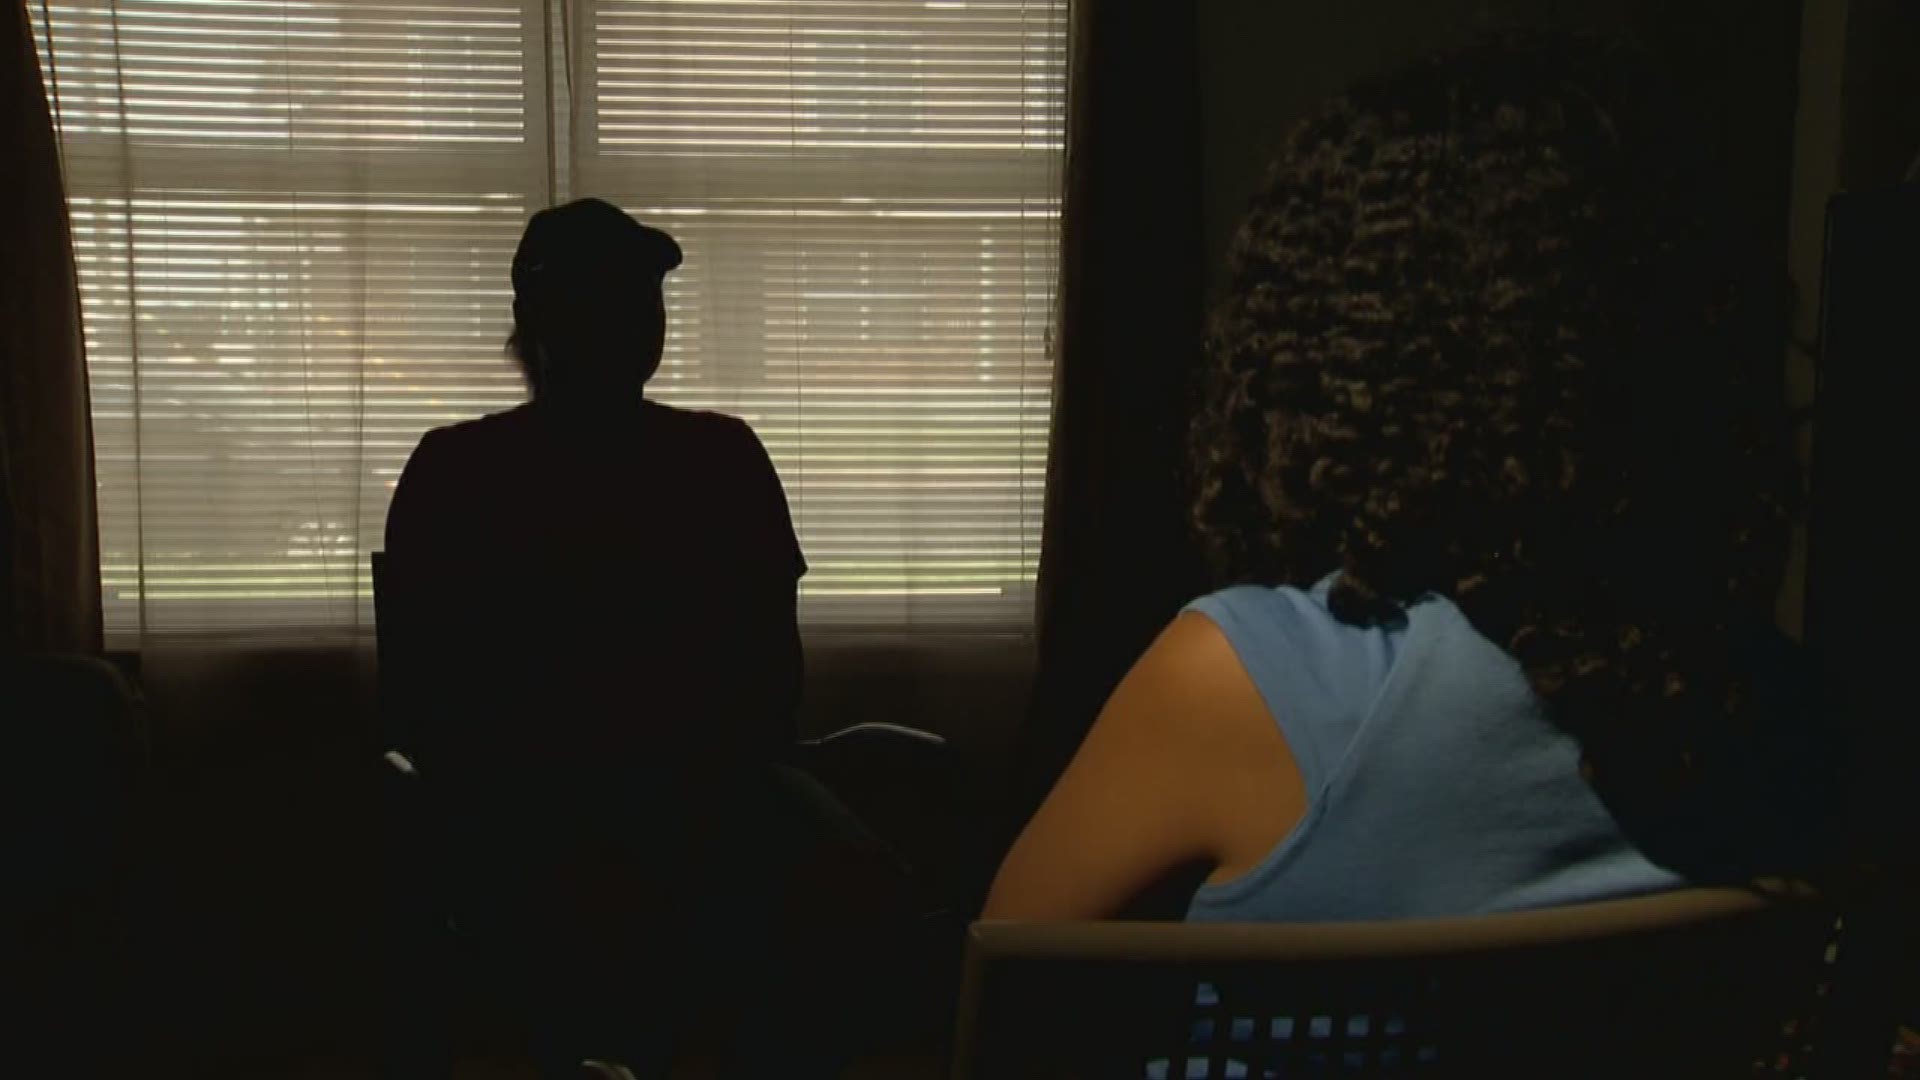 An Austin mother is issuing a warning to parents after a man kidnapped her child Tuesday.